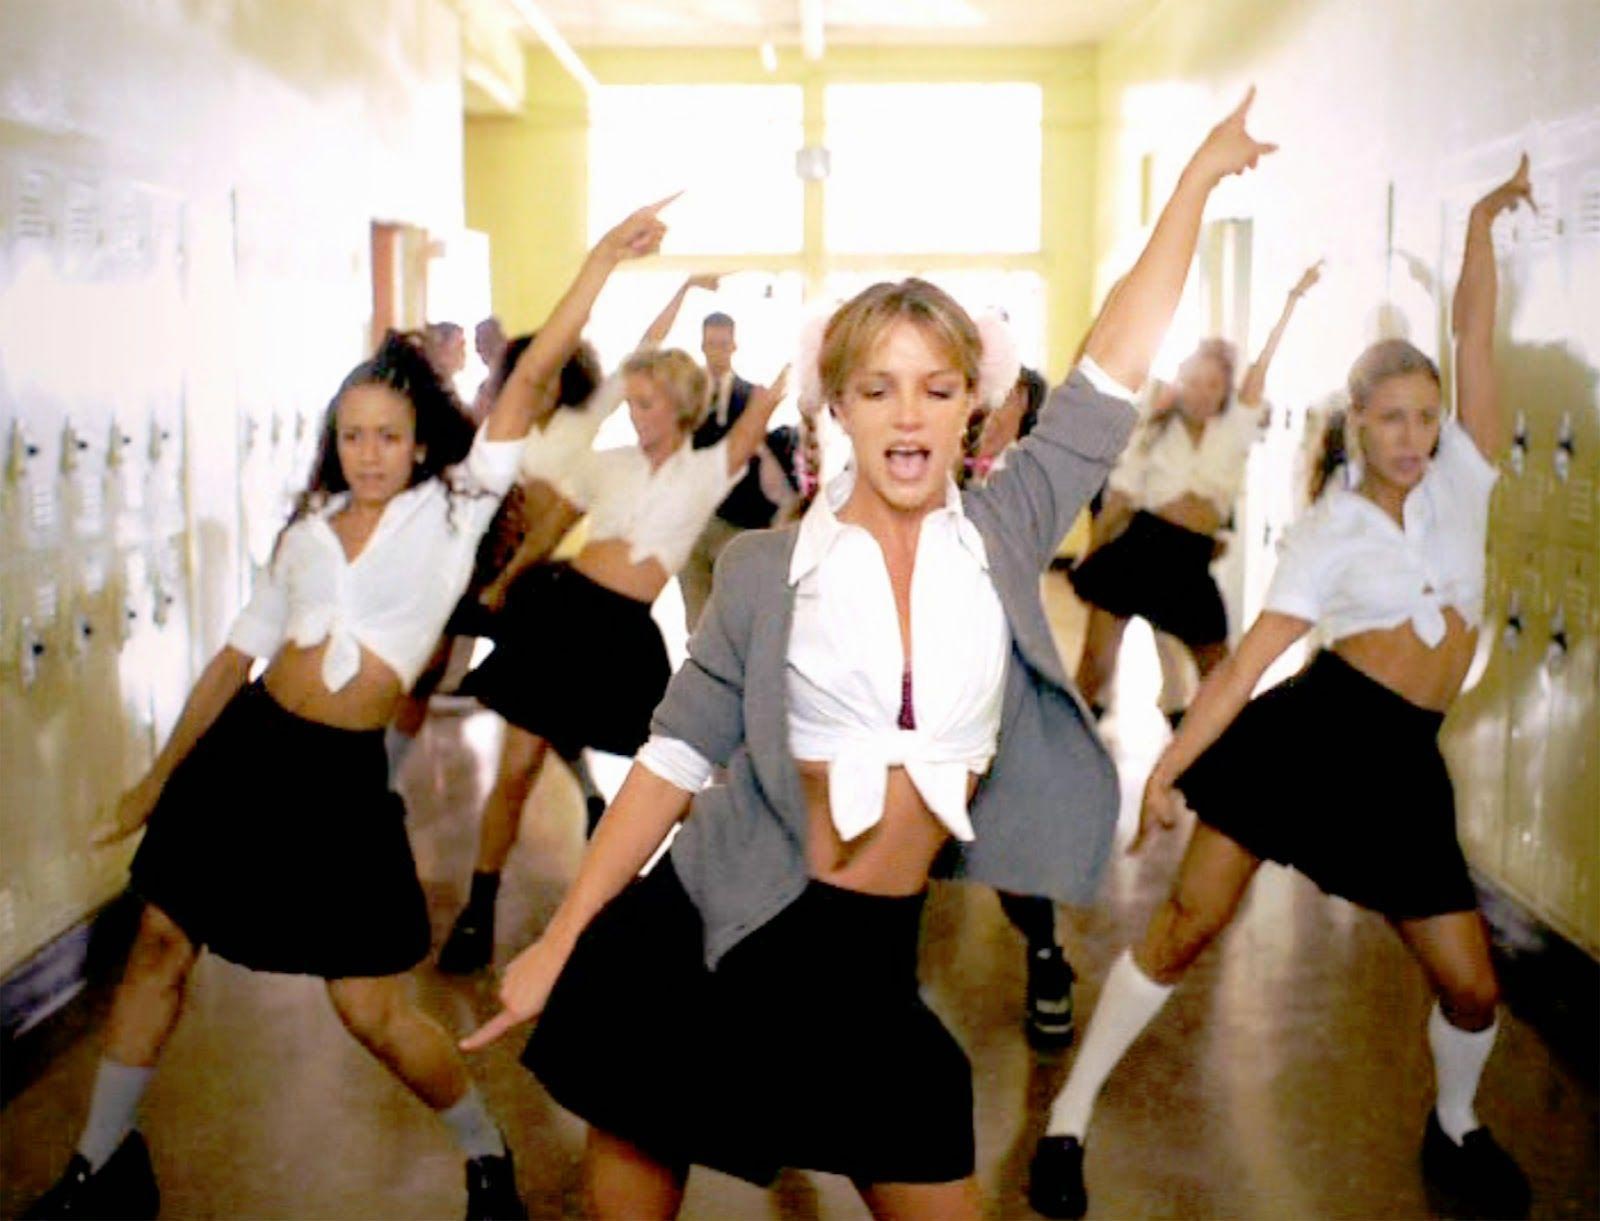 Baby on more time. Бритни Спирс School. Бритни Спирс 1998. Бритни Спирс Hit me Baby one more time. Бритни Спирс в клипе Baby one more time.